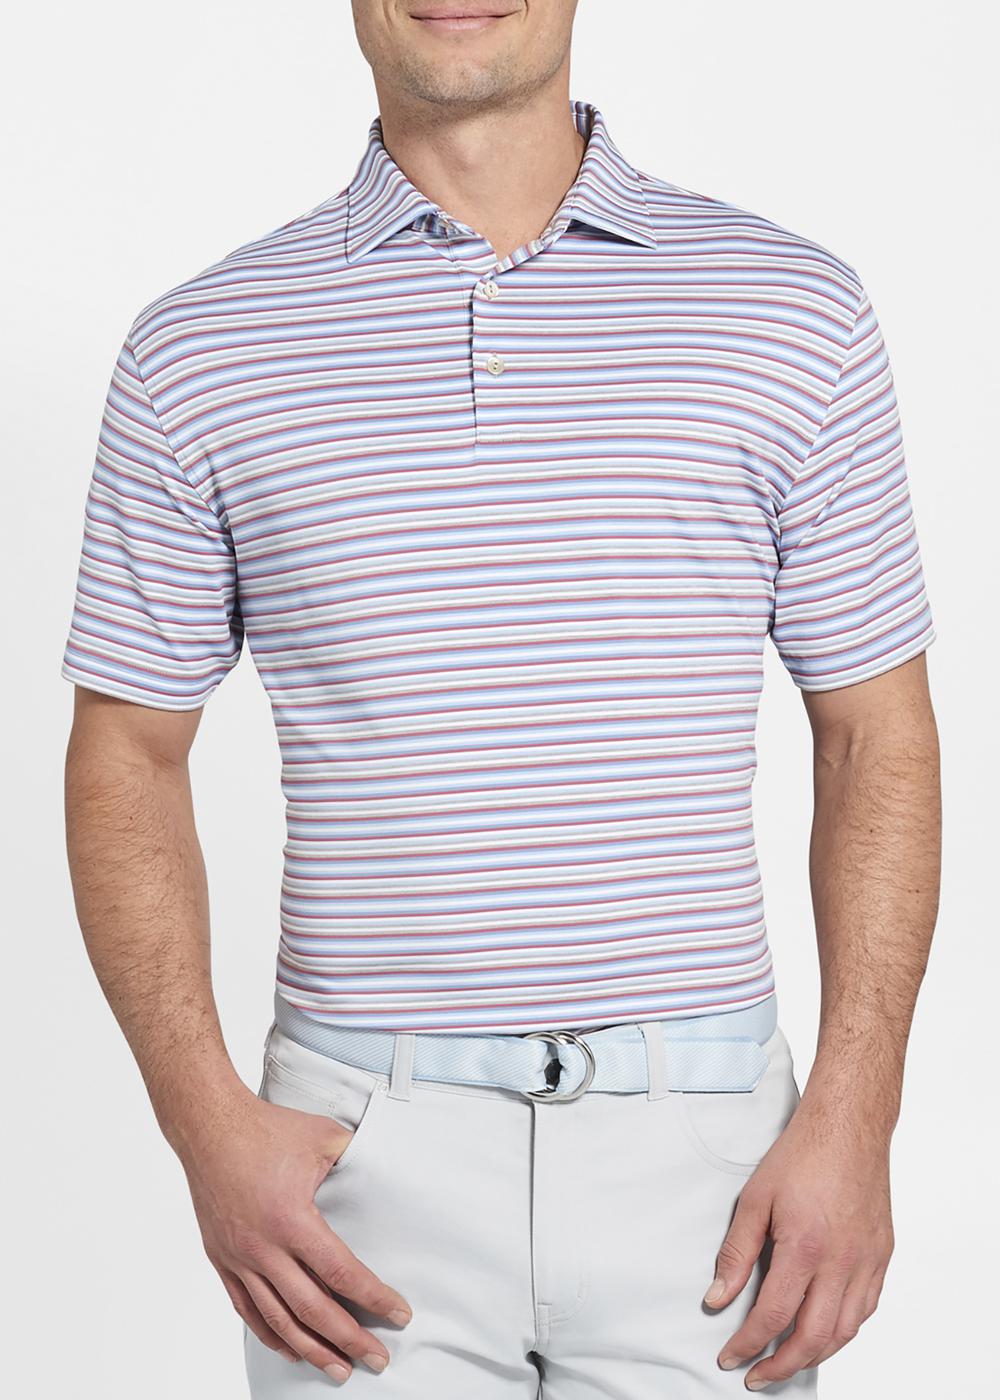 Peter Millar - Similar stores, new products, store review, Q&A | Modvisor